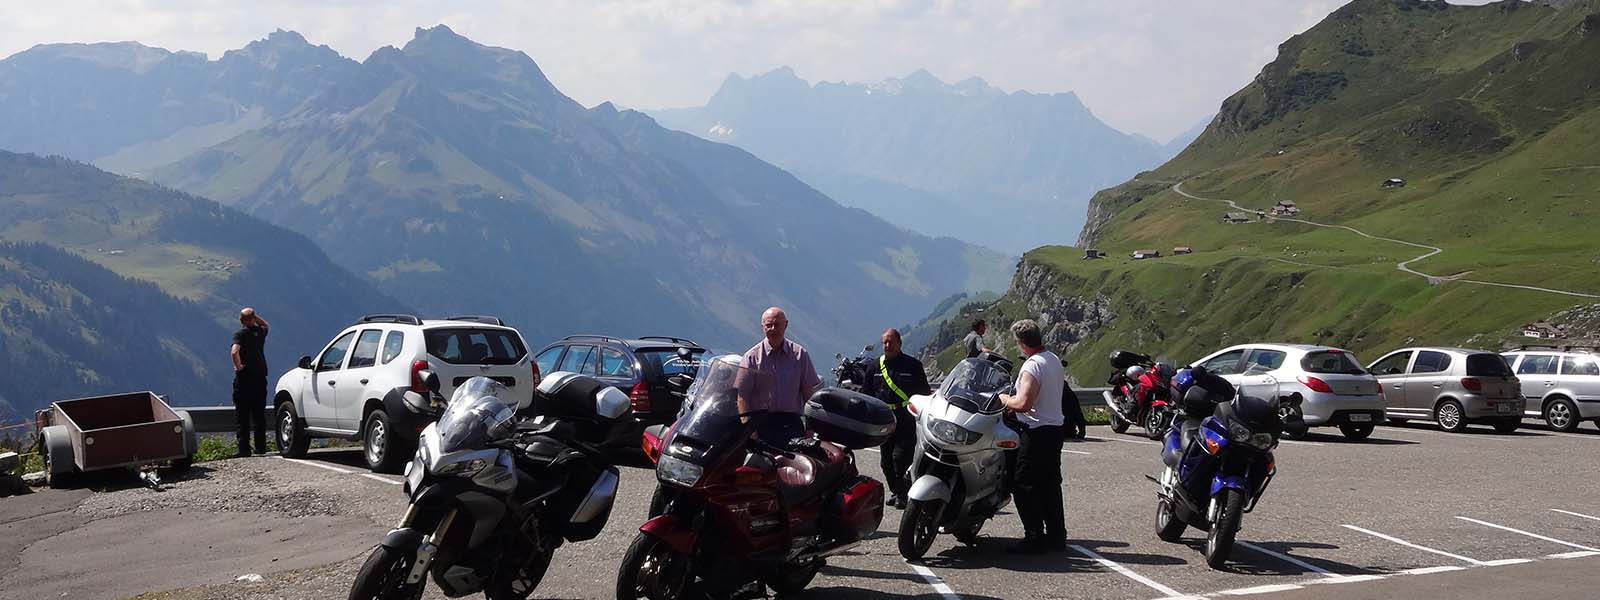 The Mighty Alps and Dolomites Motorcycle Tour